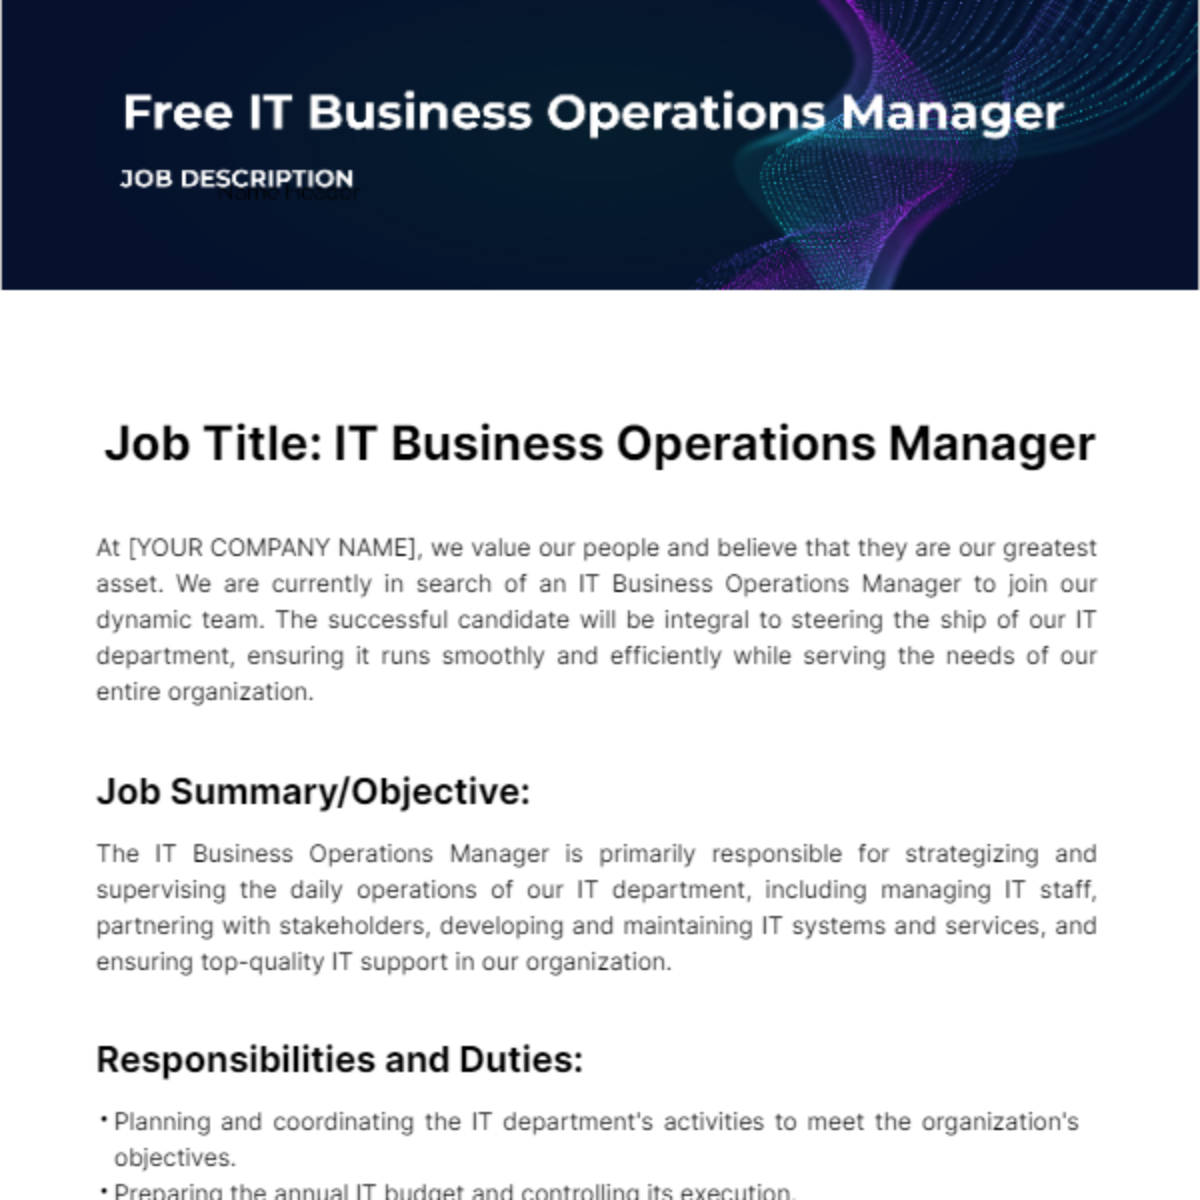 Free IT Business Operations Manager Job Description Template